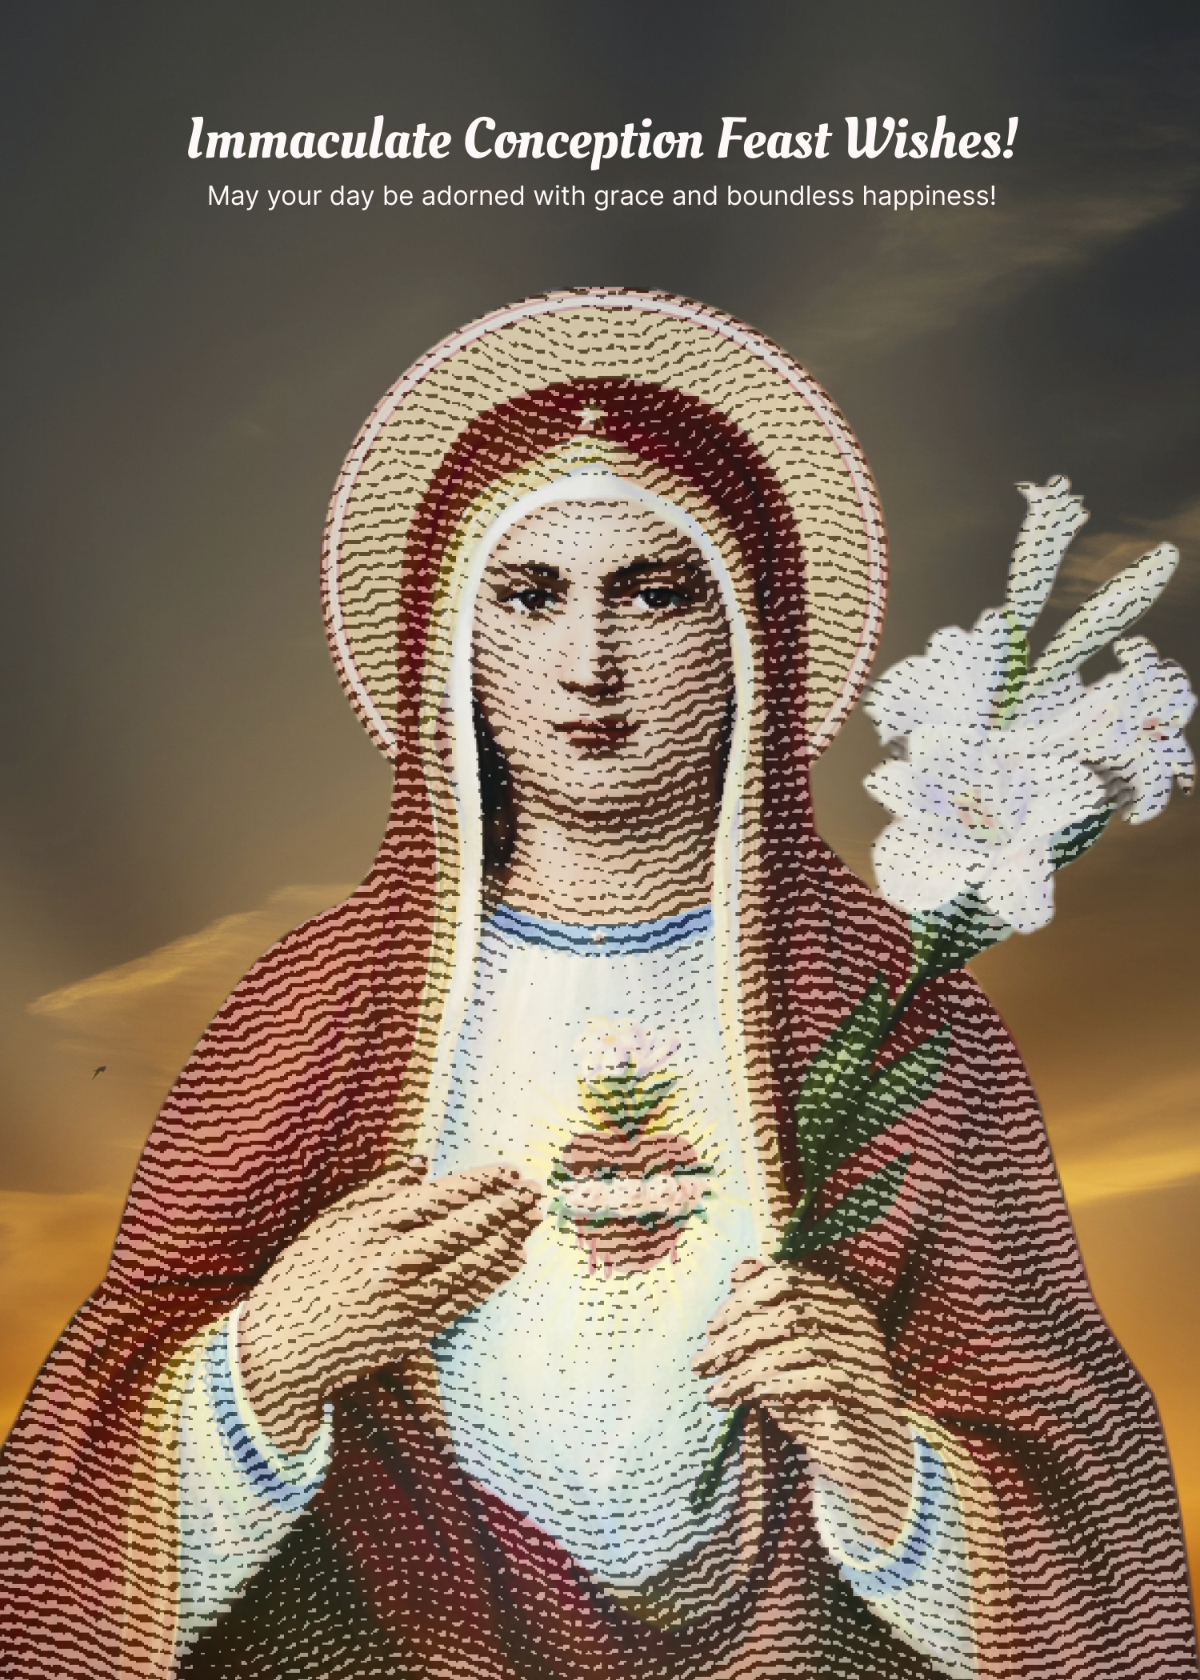 Feast of the Immaculate Conception Wishes